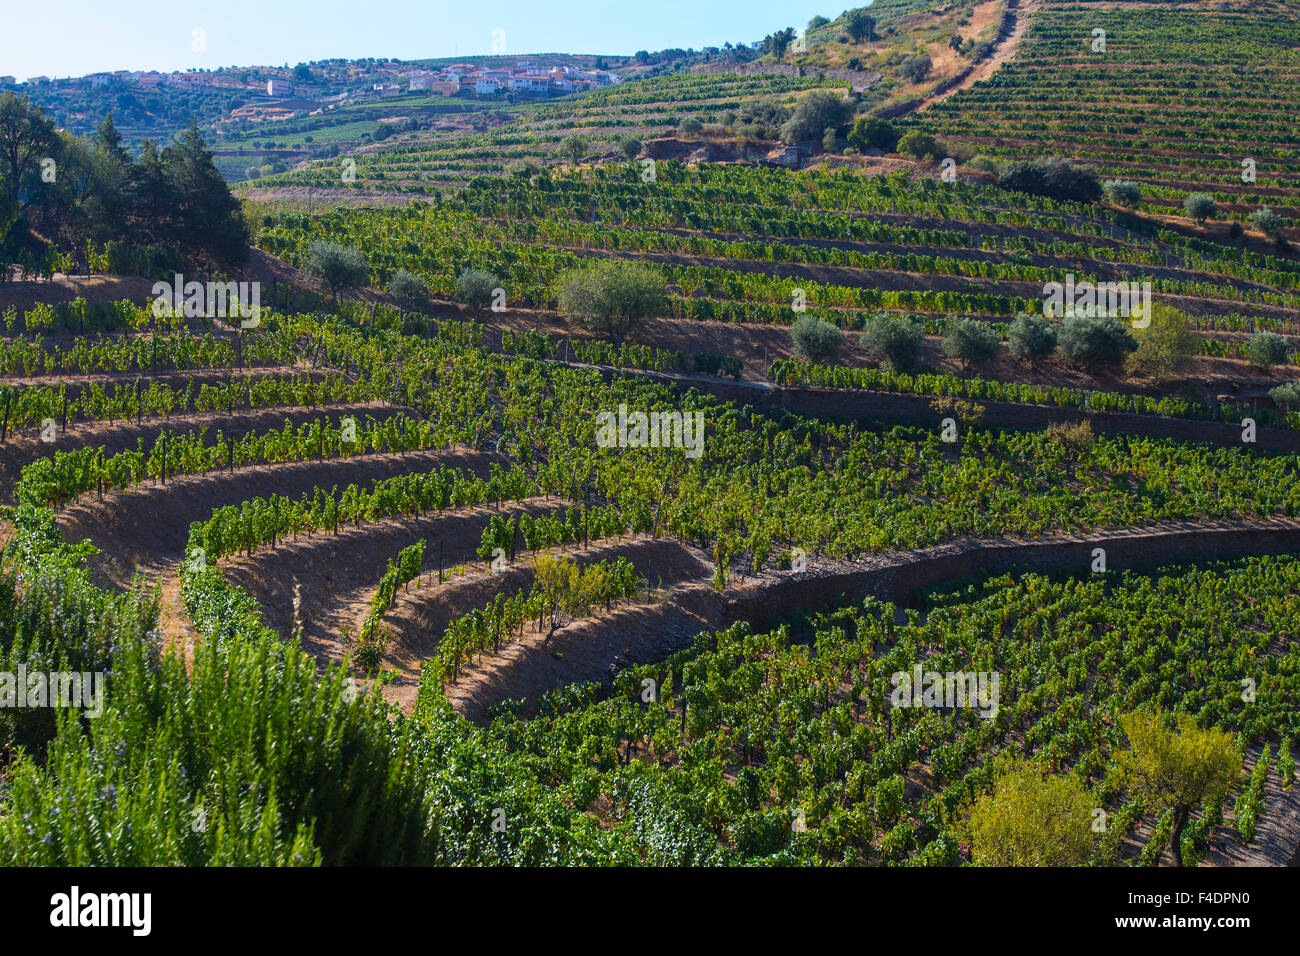 Terraced hillside vineyards in the Douro Valley of Portugal. Stock Photo